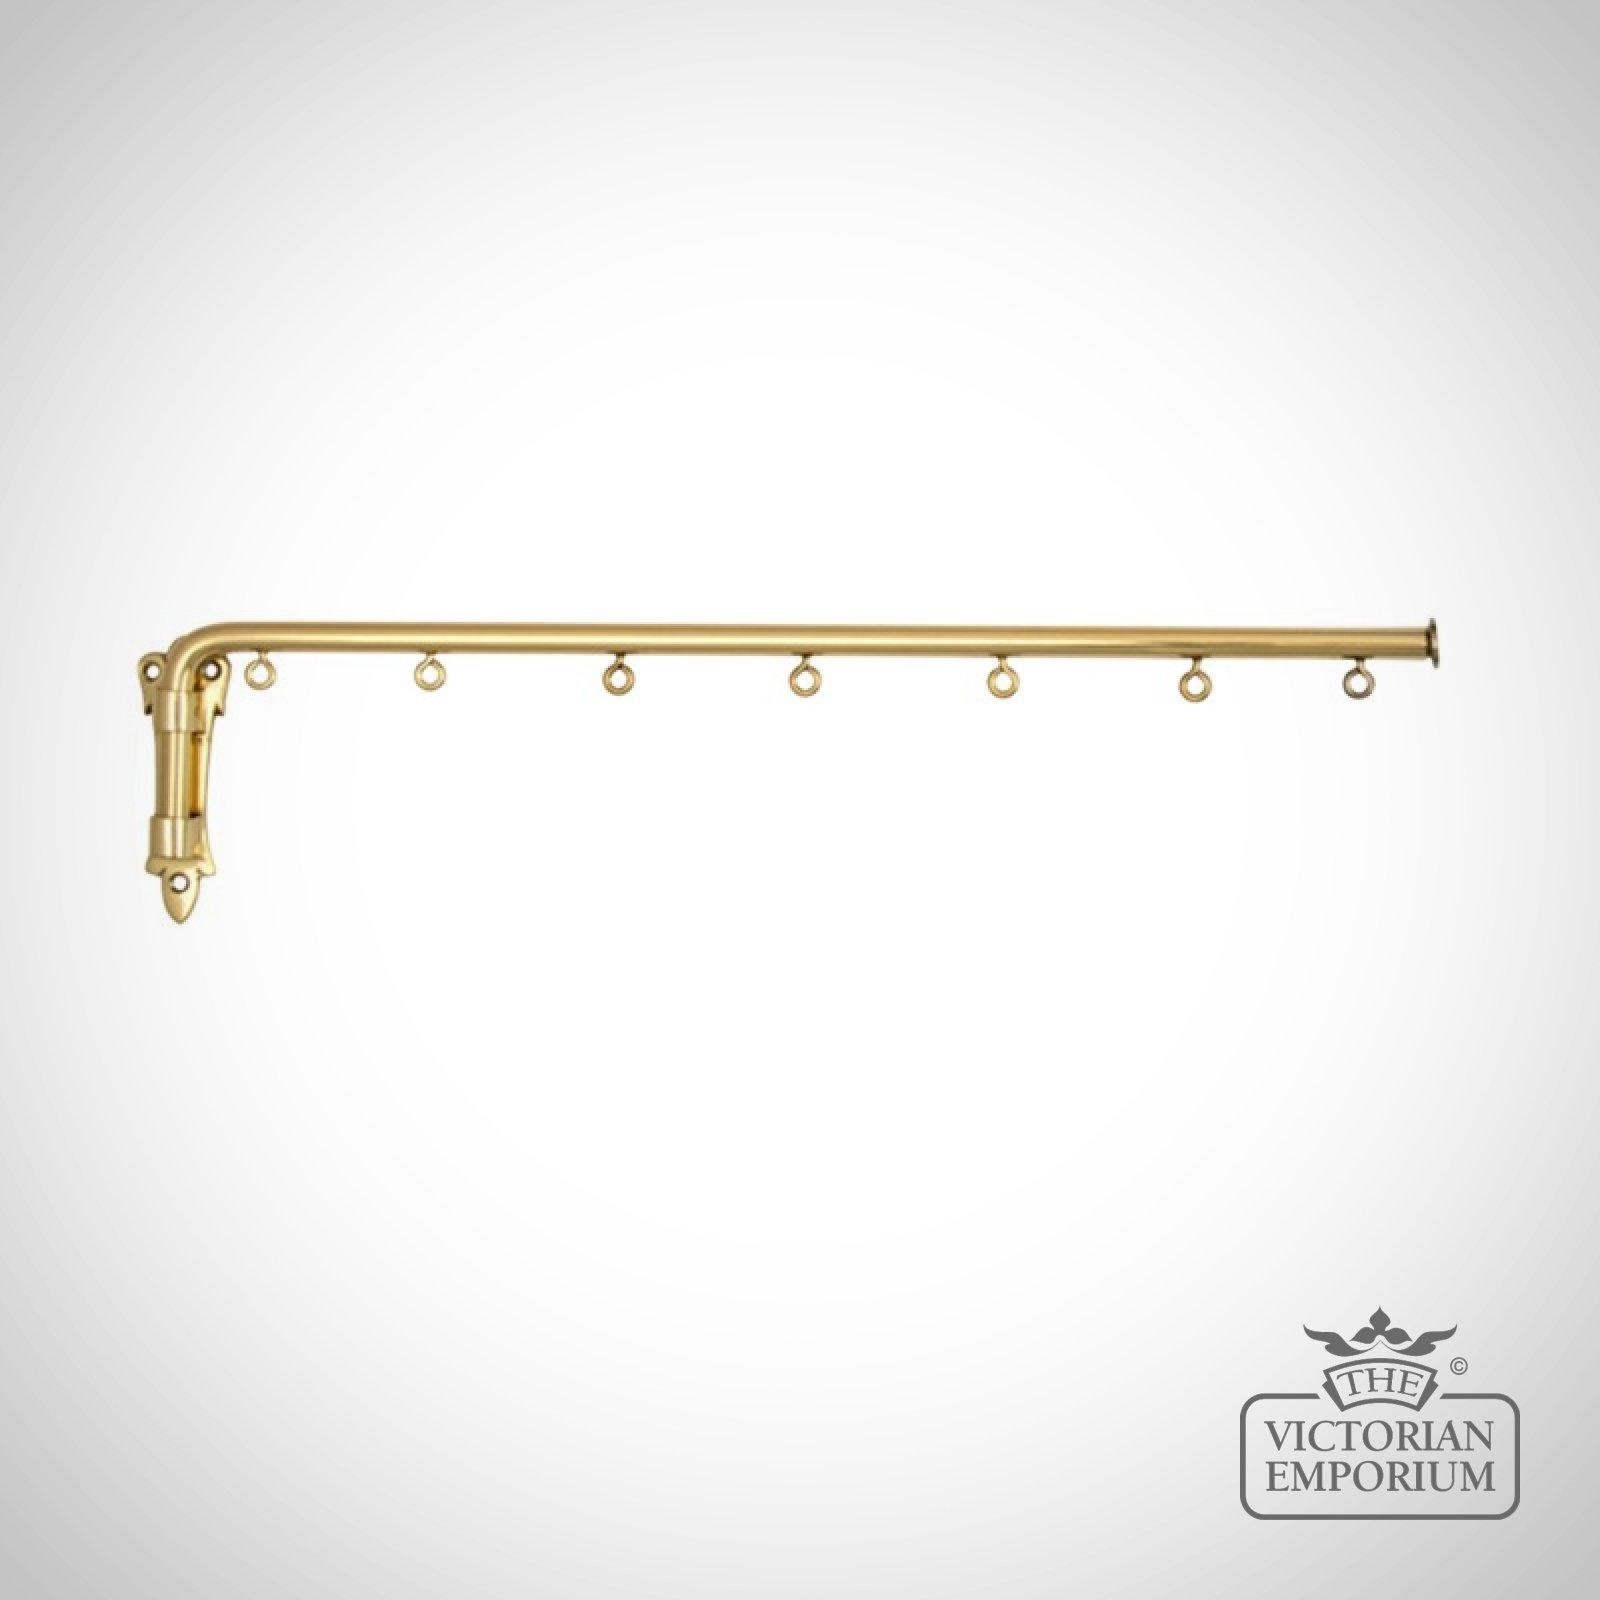 Dormer Window brass curtain swing arm with or without eyes